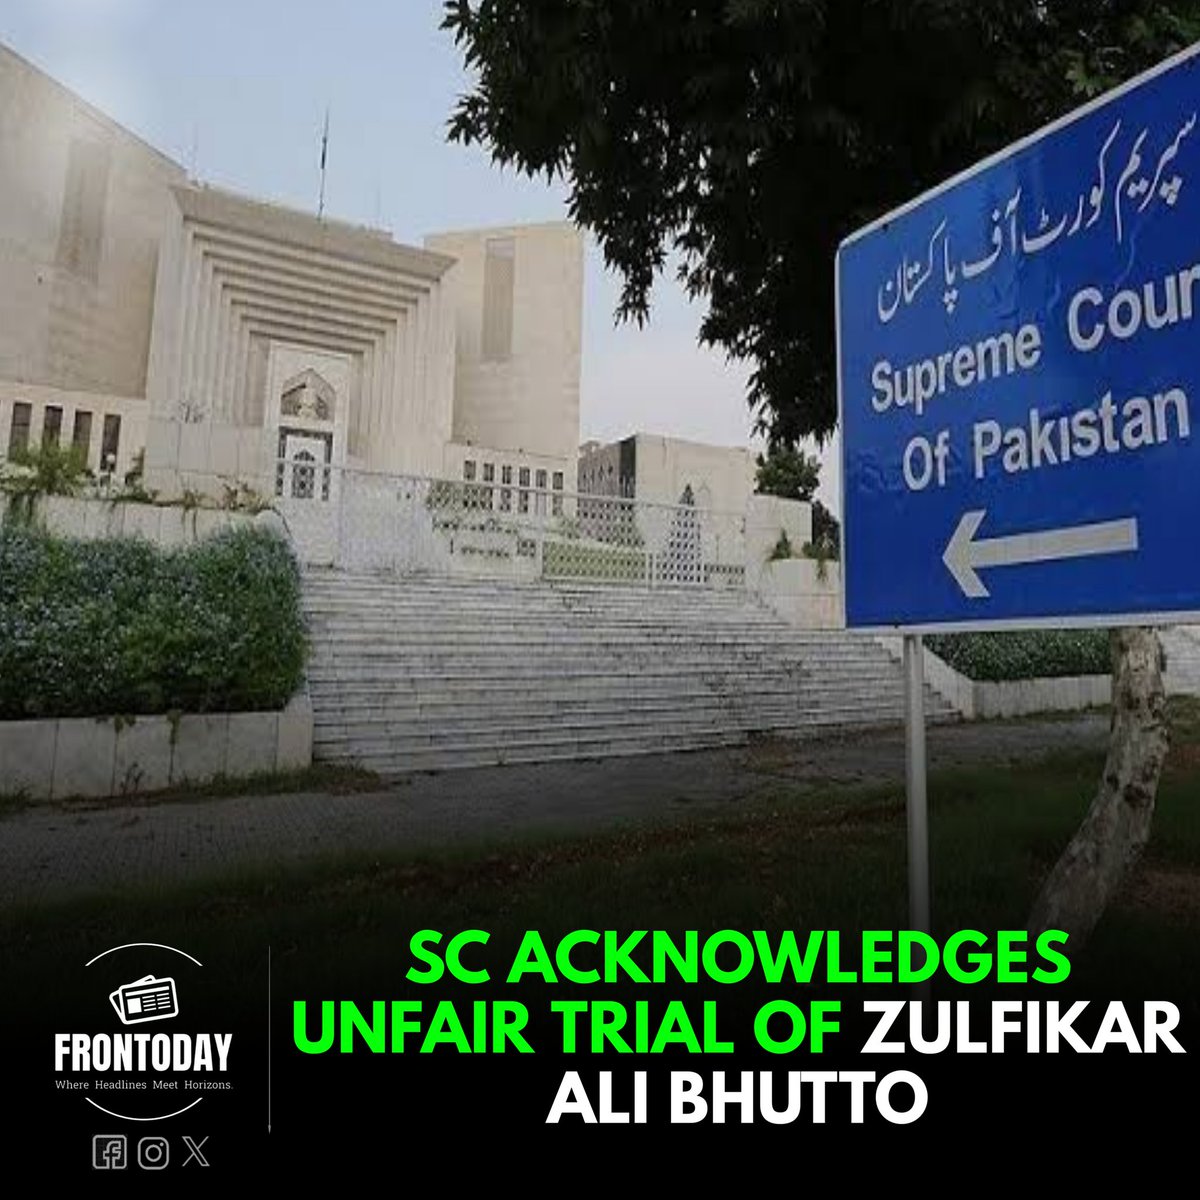 After over 44 years, the Supreme Court has admitted the injustice in the trial that led to the execution of former PM Zulfikar Ali Bhutto. This historic decision marks a step towards justice and integrity in our legal system. #SupremeCourt #ZulfikarAliBhutto #UnfairTrial #Justice